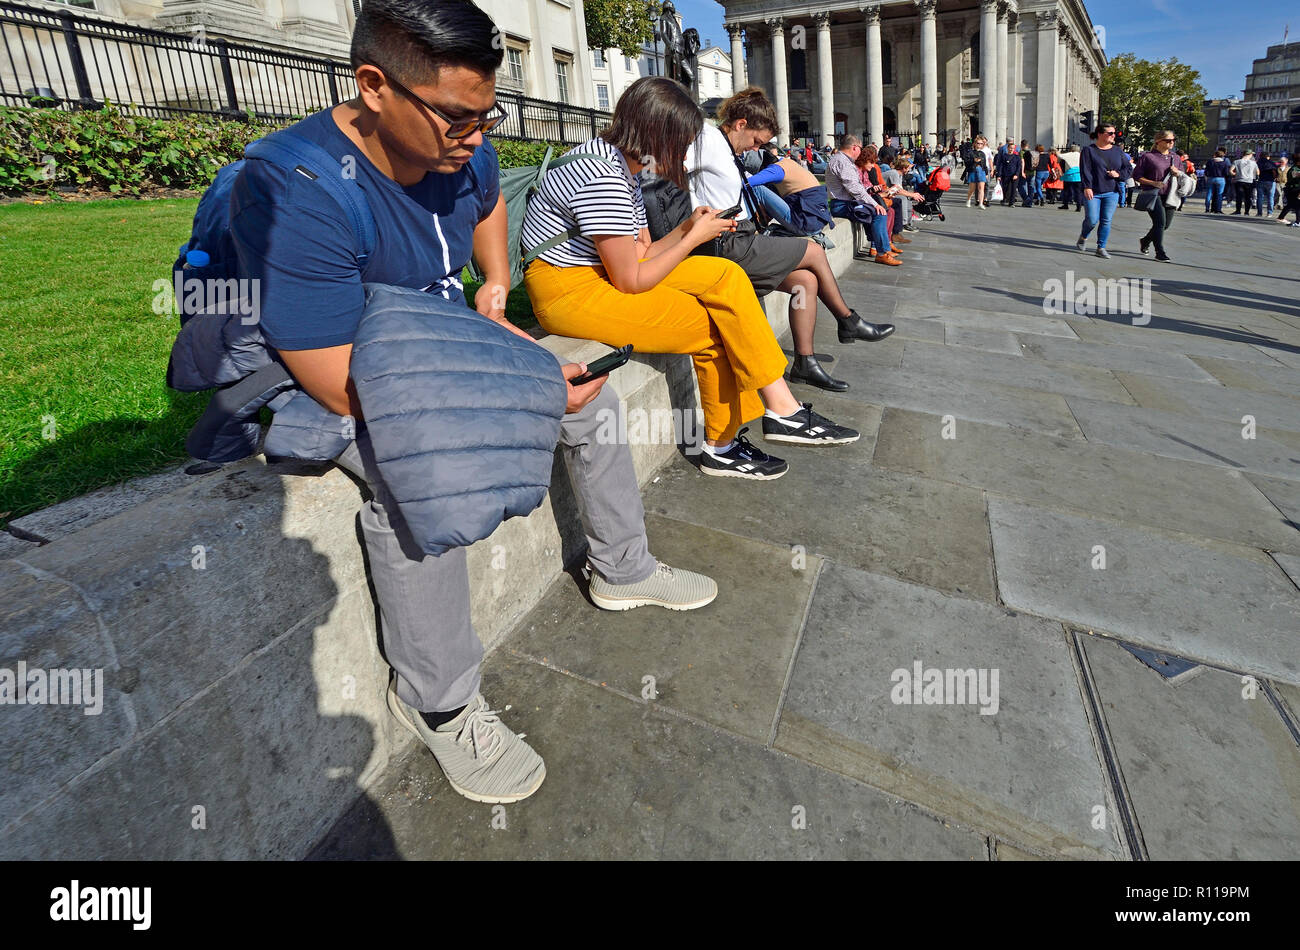 People on their mobile phones at lunchtime in front of the National Gallery in Trafalgar Square, London, England, UK. Stock Photo